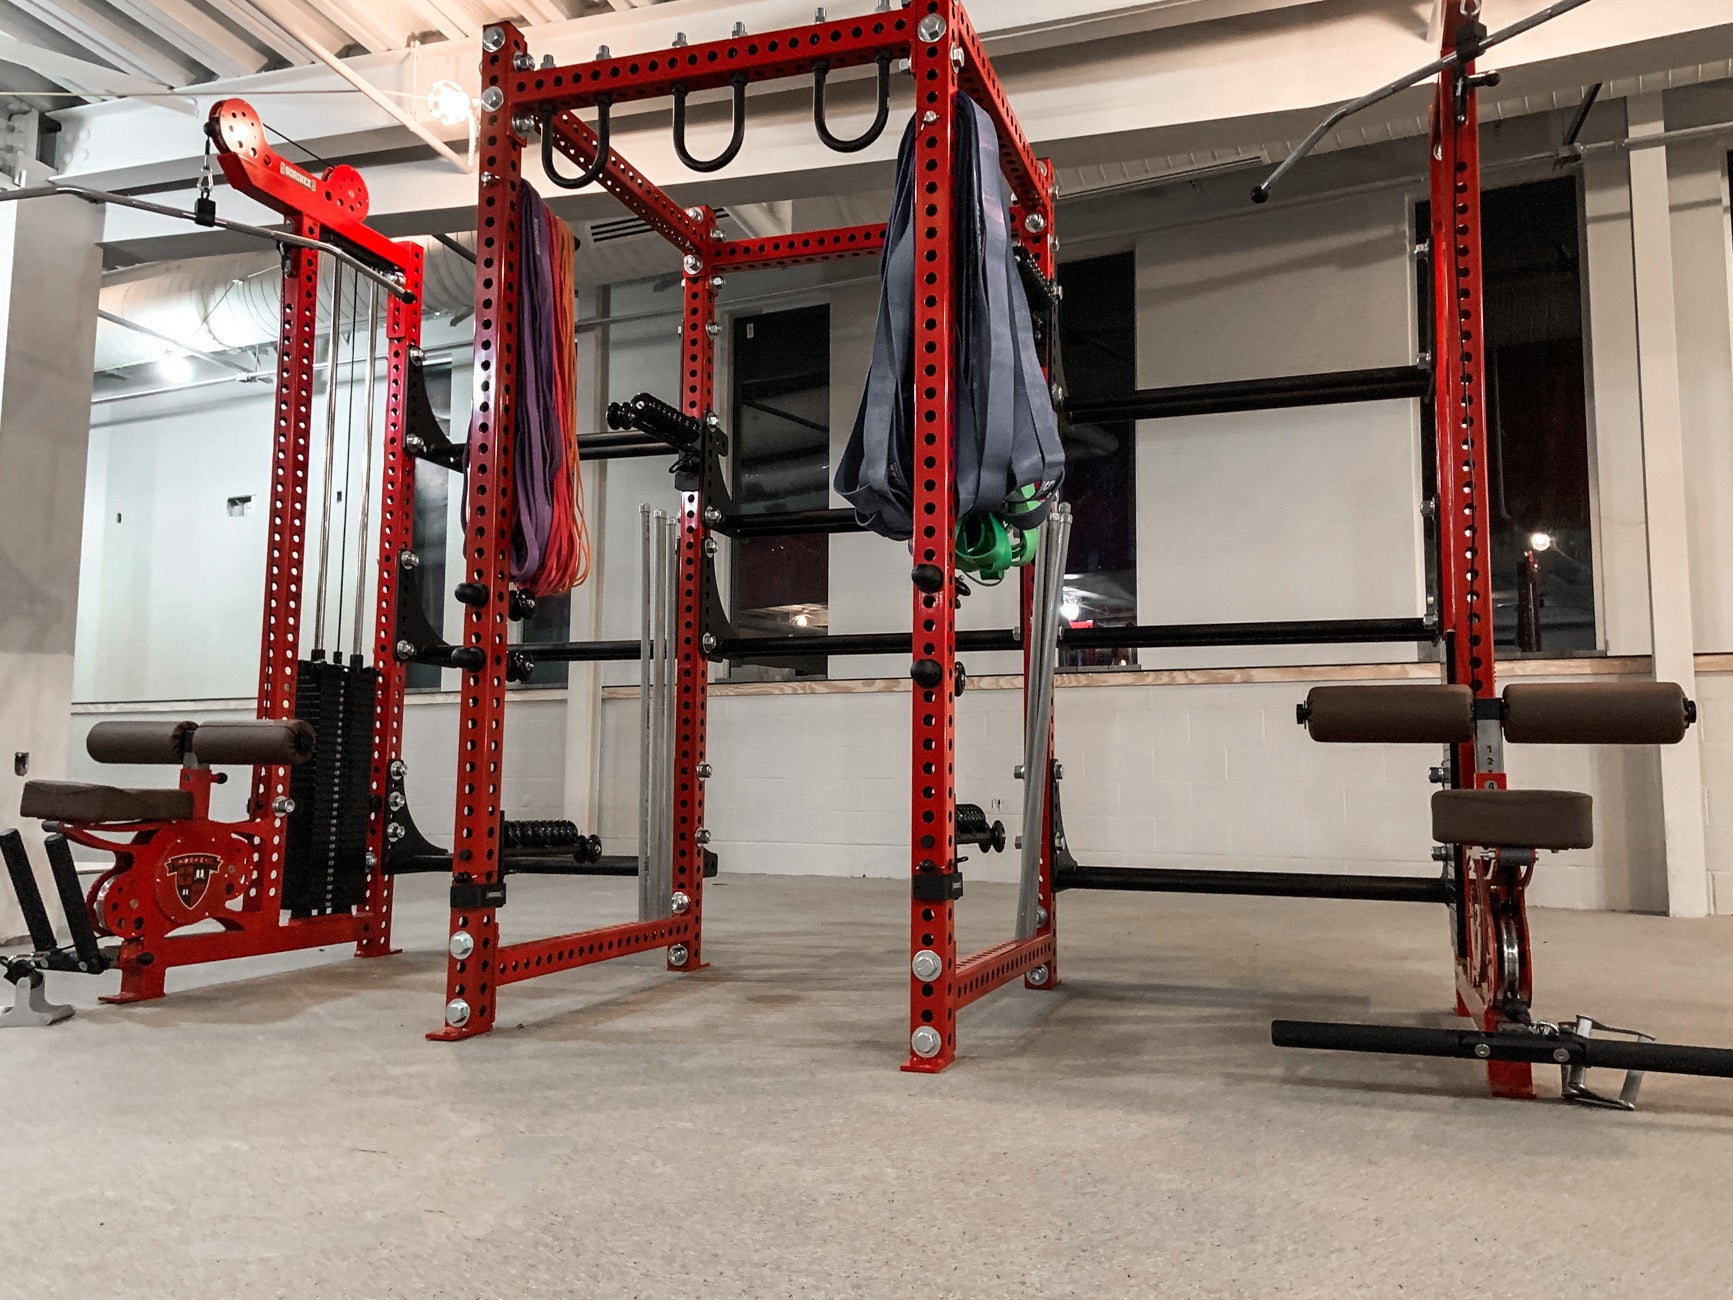 St. Lawrence Sorinex Weight Room